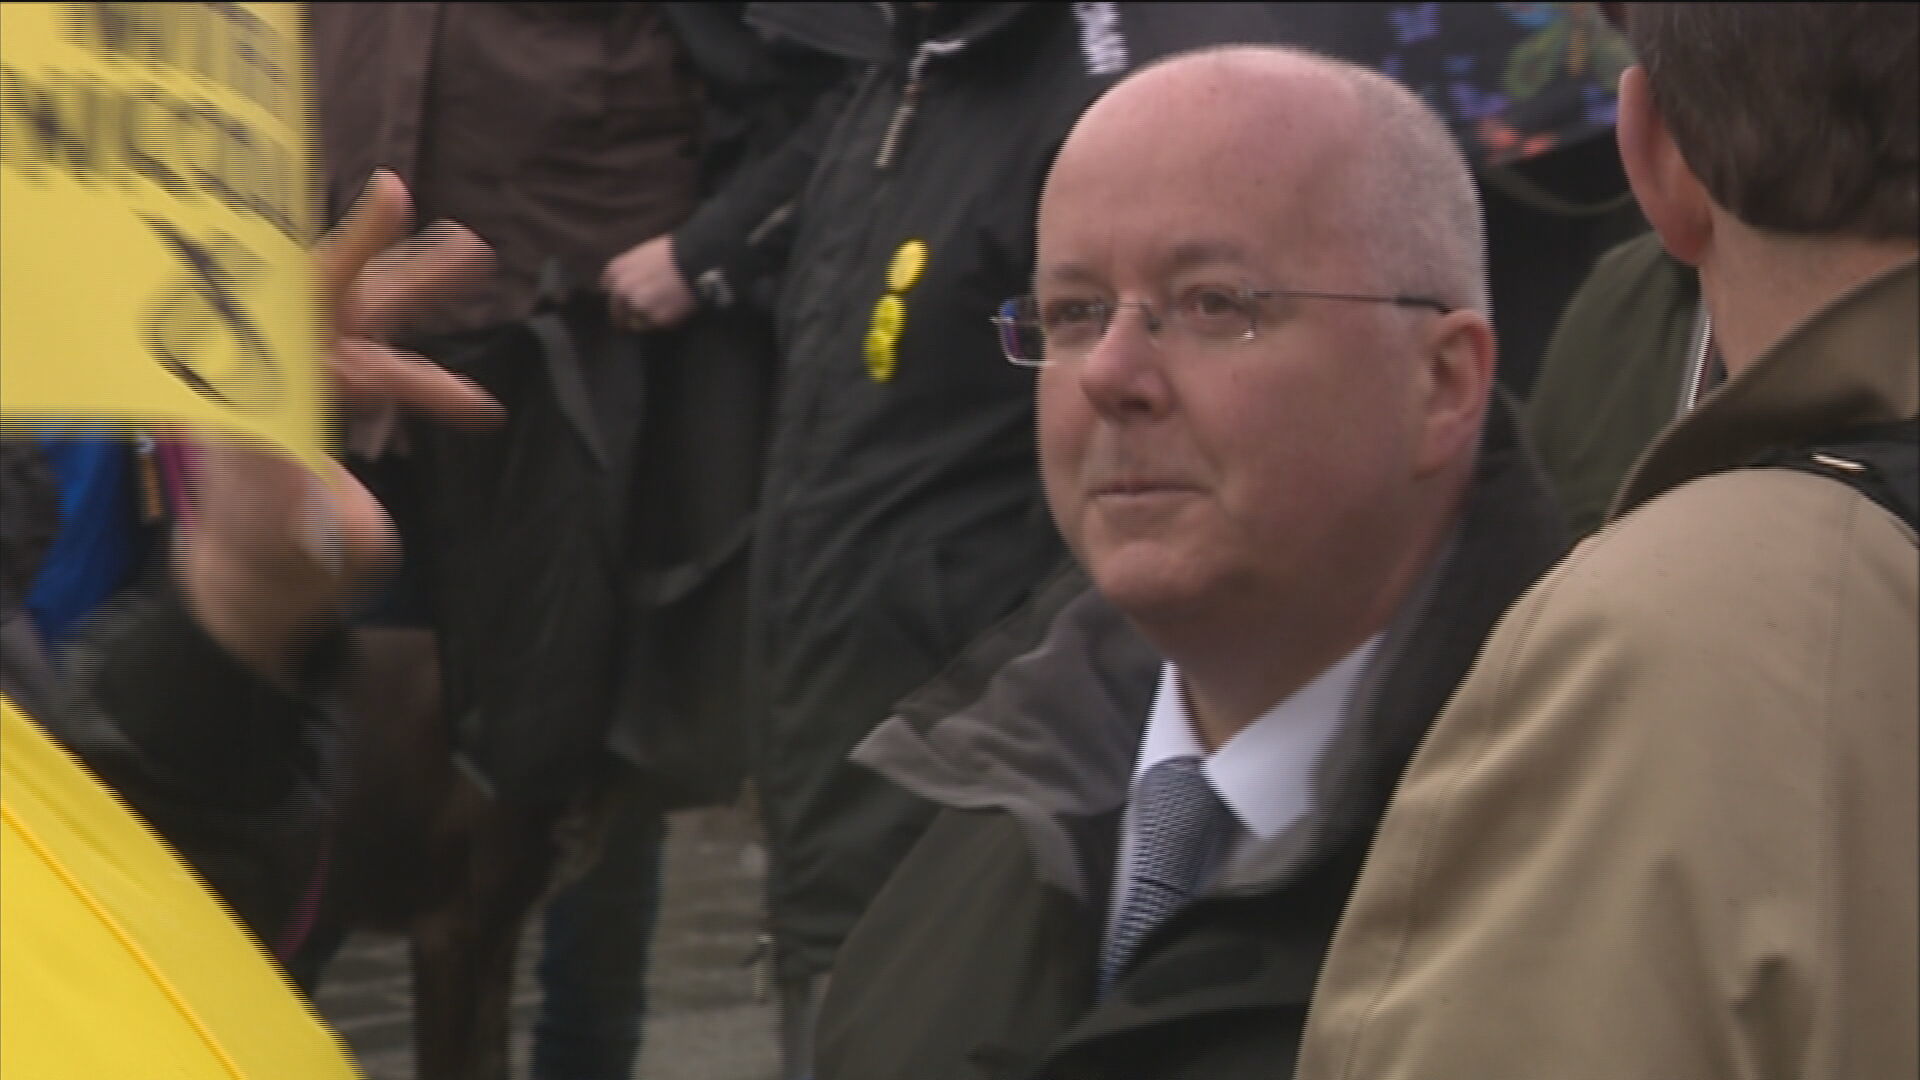 Former SNP chief executive Peter Murrell was questioned by police on Wednesday for nearly 12 hours.